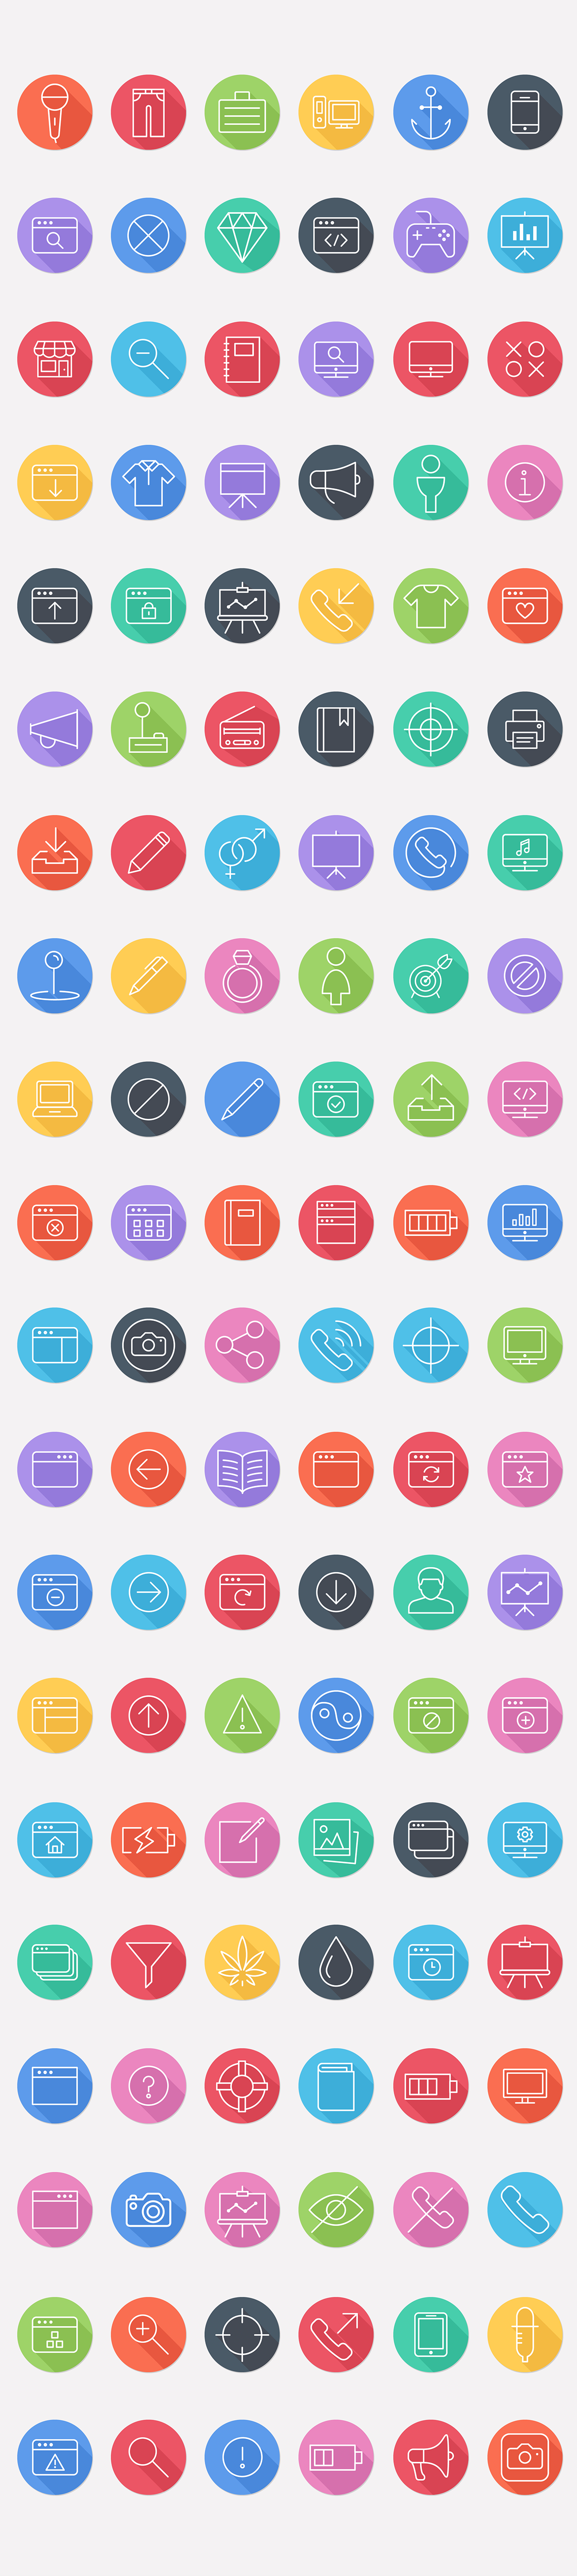 icons line ios8 stroke flat Icon design Web vector free colorful flat icons line icons